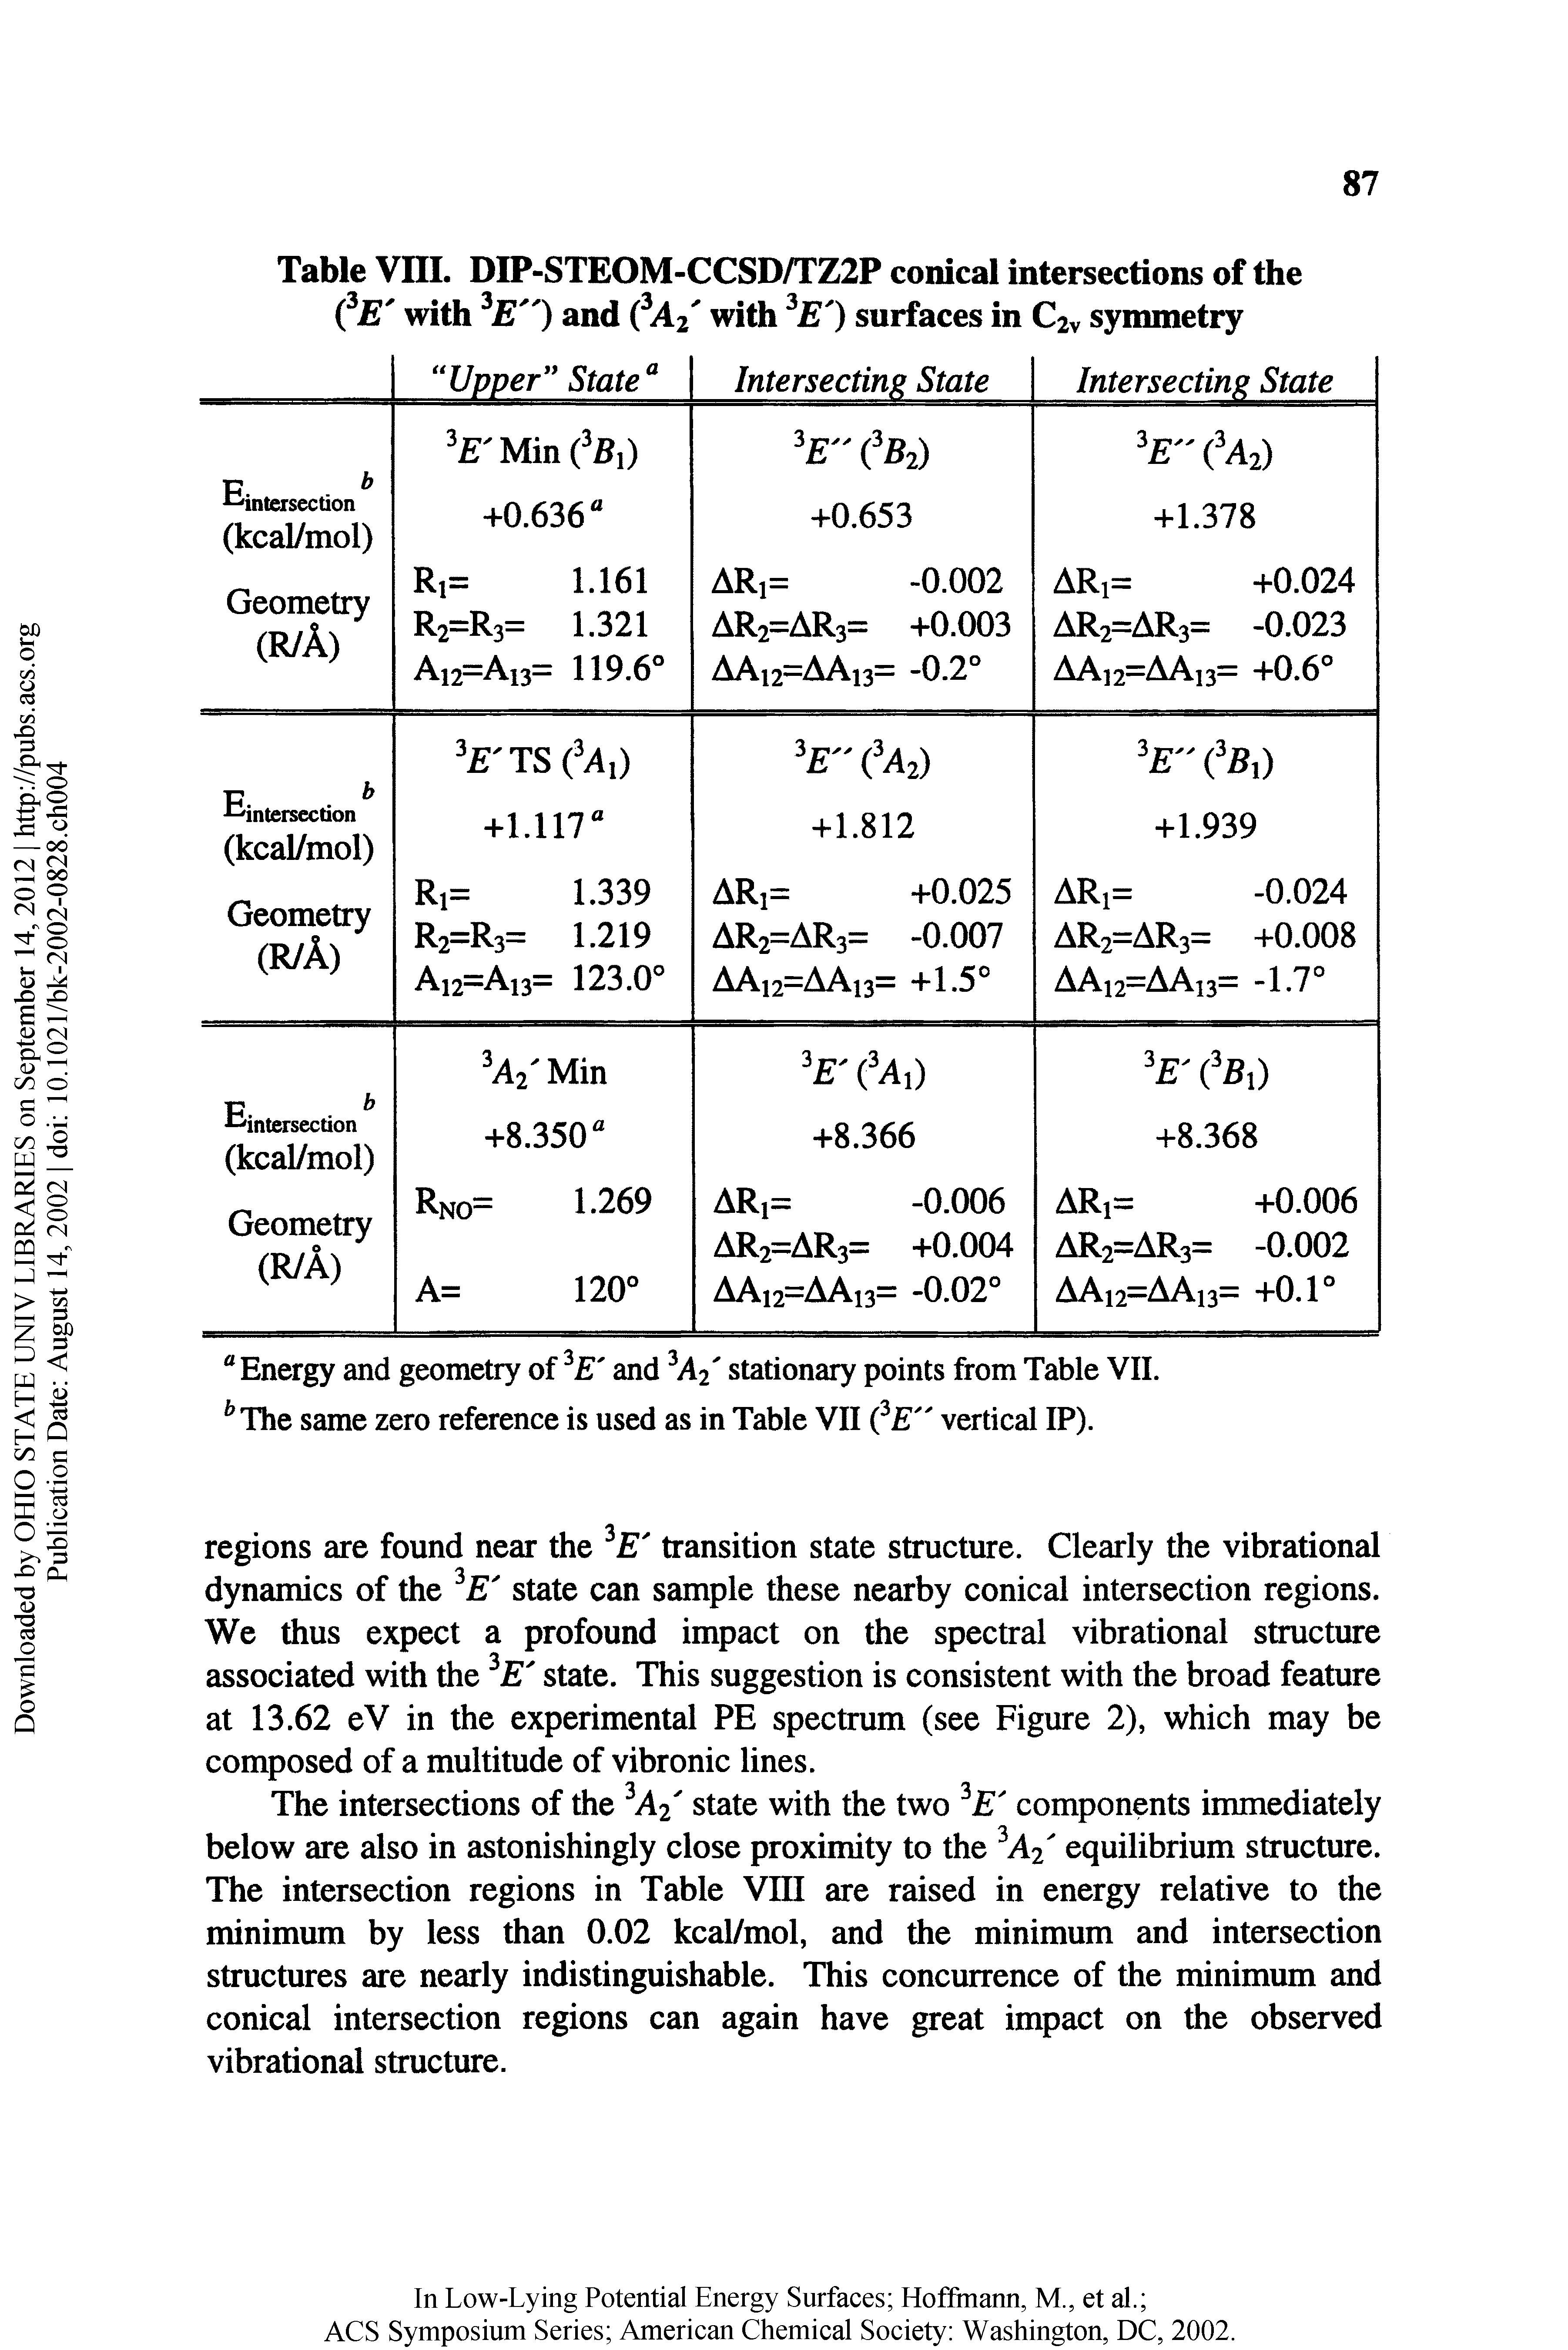 Table VIII. DIP-STEOM-CCSD/TZ2P conical intersections of the...